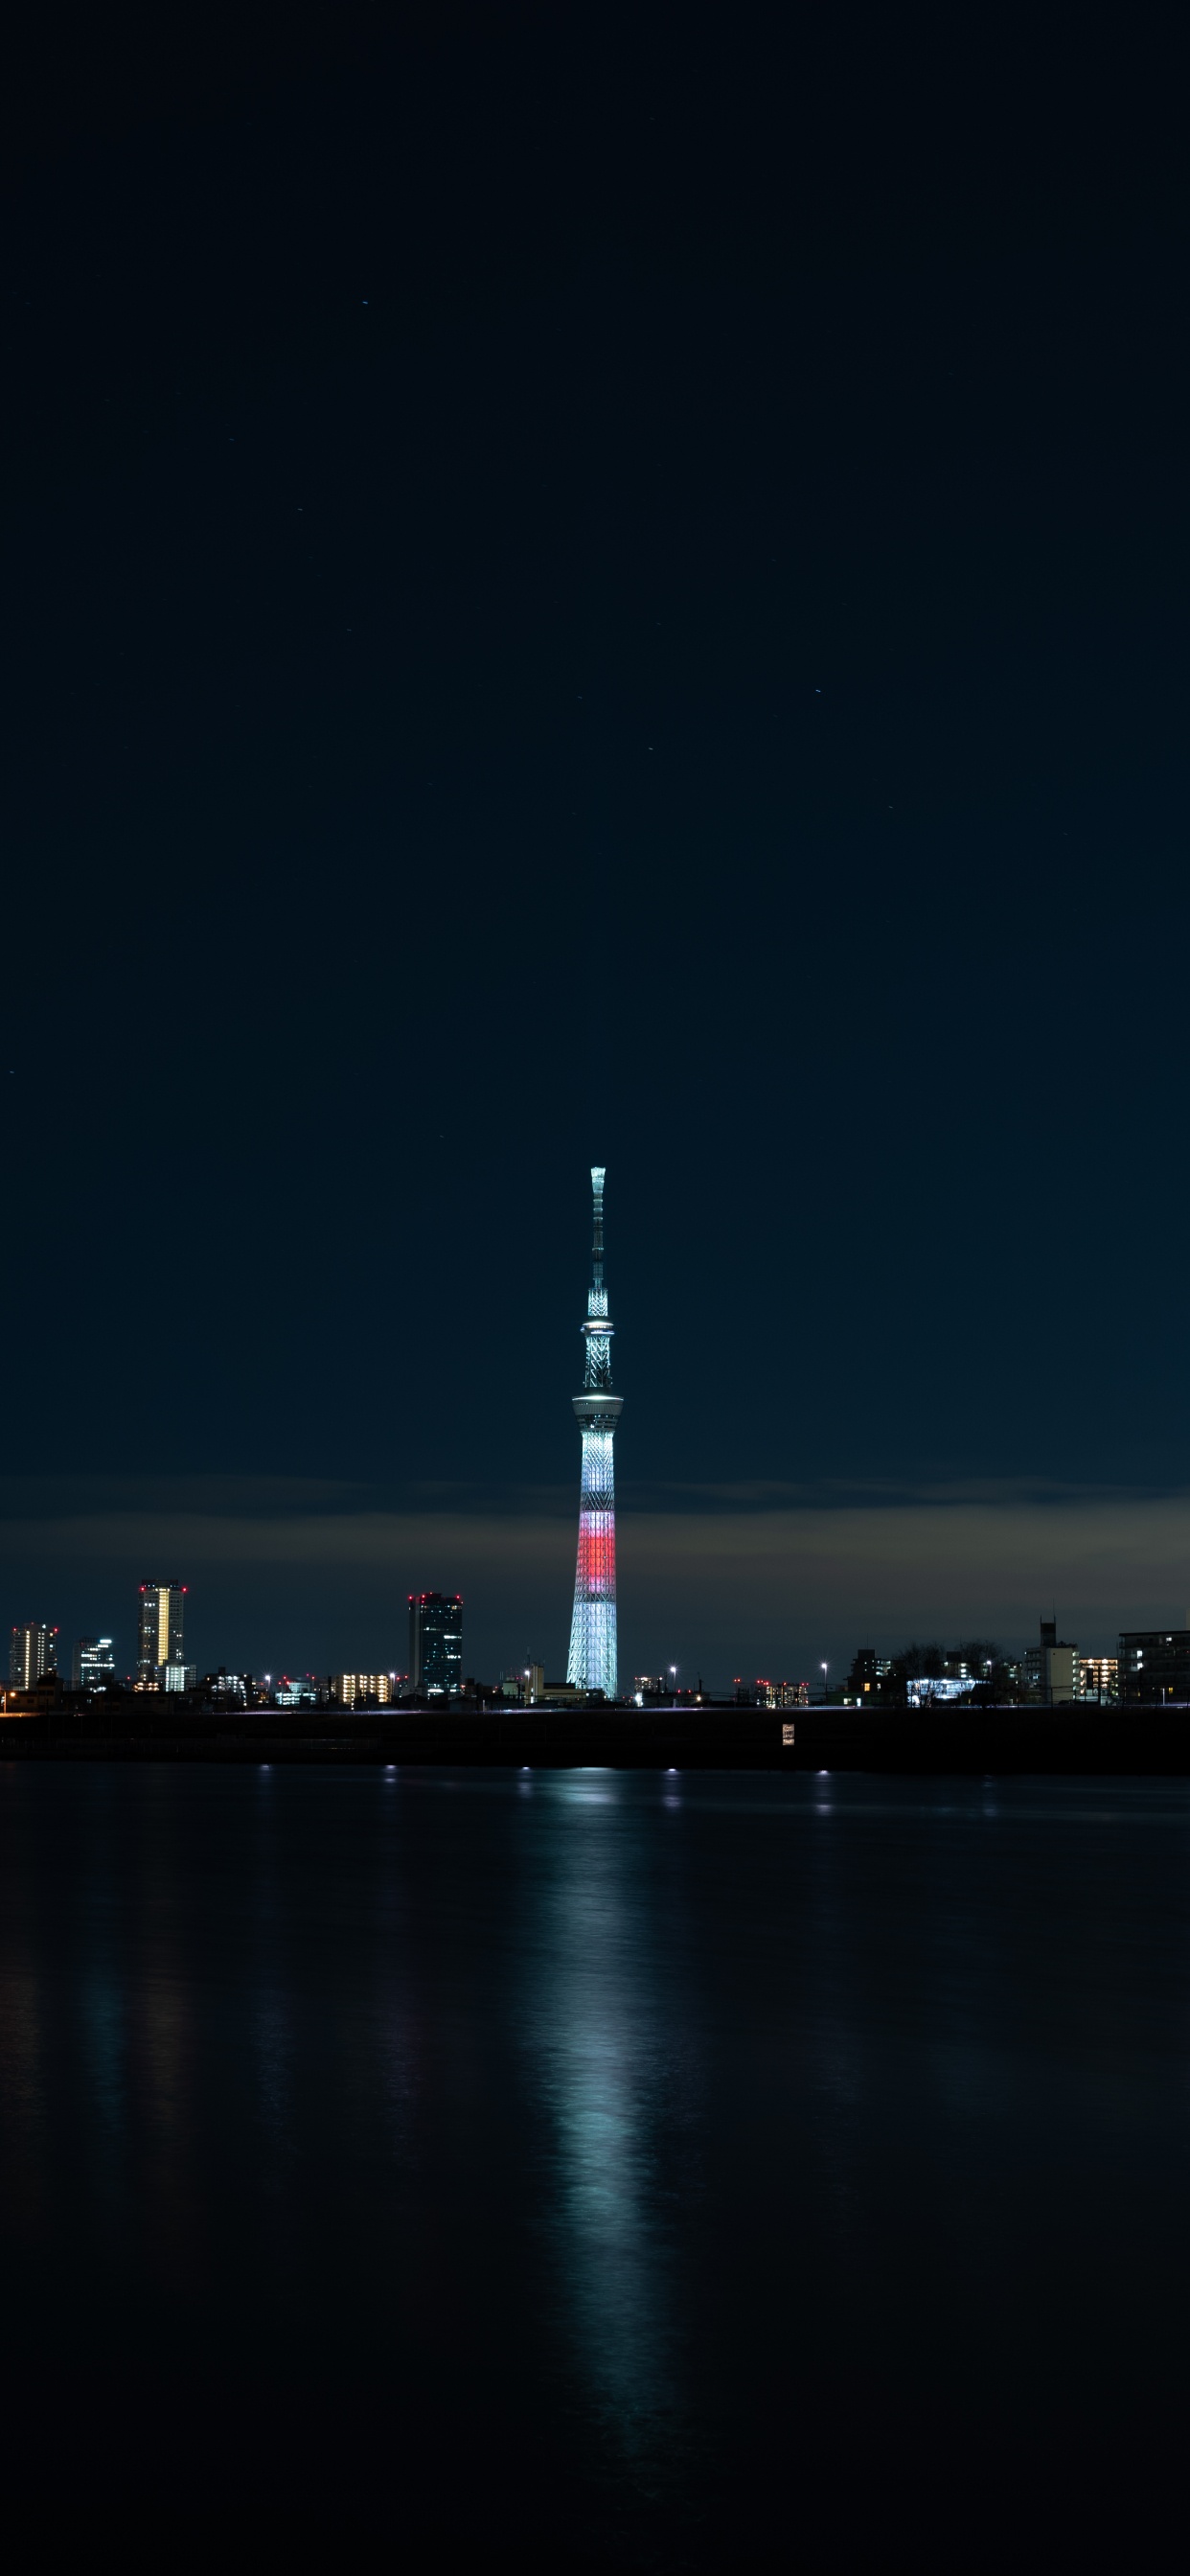 White and Red Tower Near Body of Water During Night Time. Wallpaper in 1242x2688 Resolution